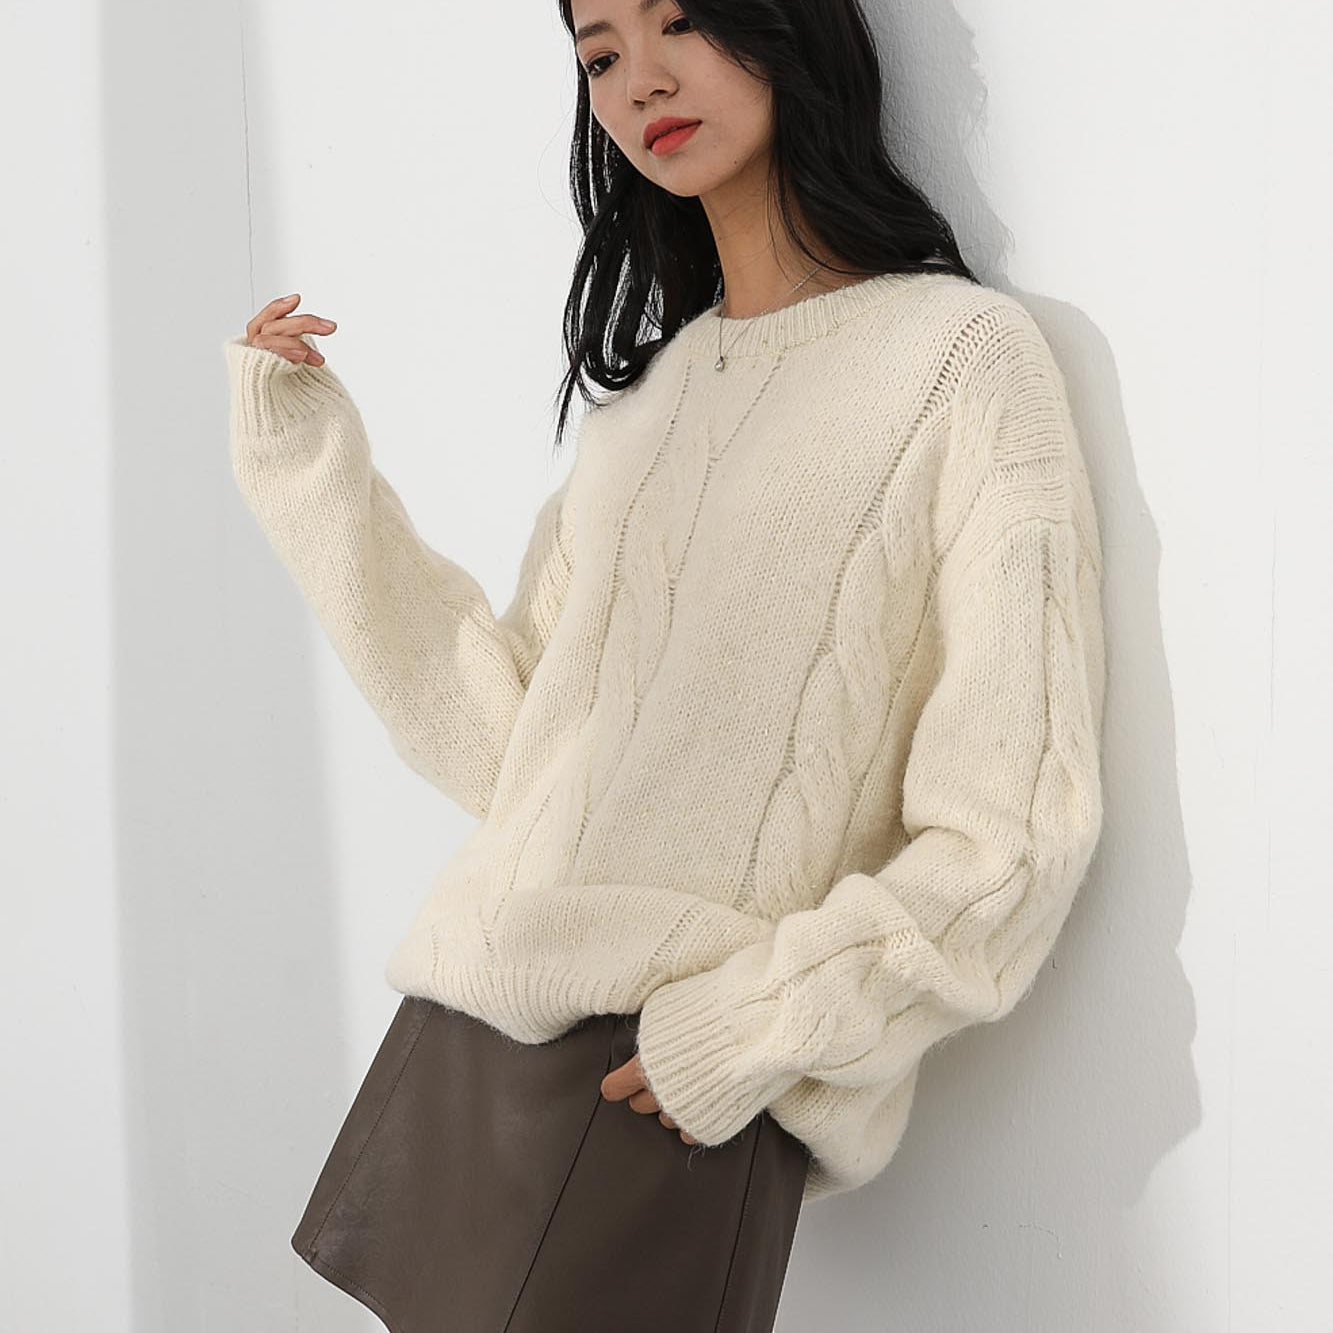 Flynn white cable knit top